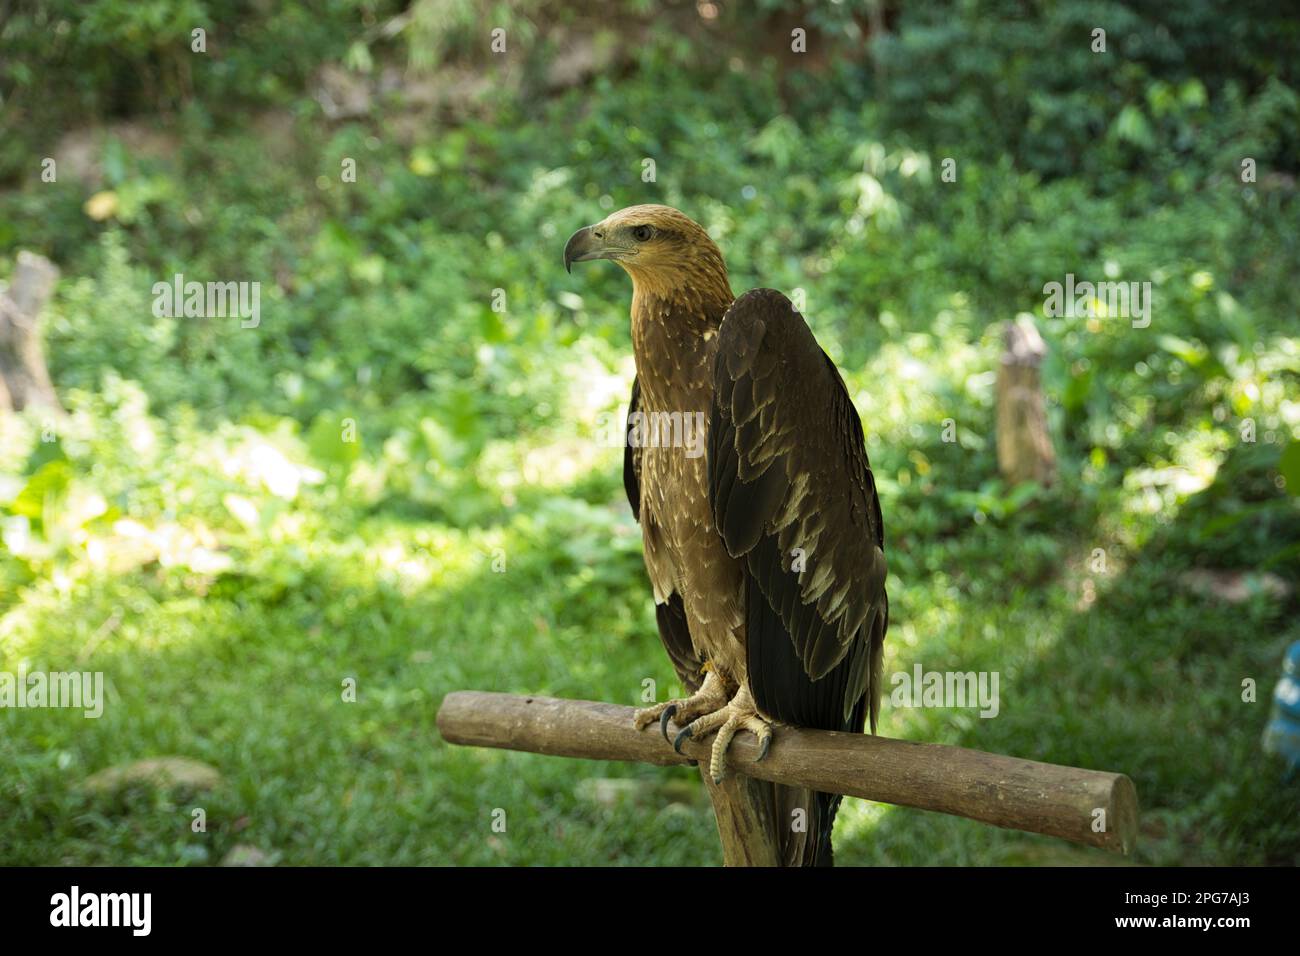 Full body shot of an eagle on a branch with a difuss background of sunlit grasses and shrubs. Stock Photo